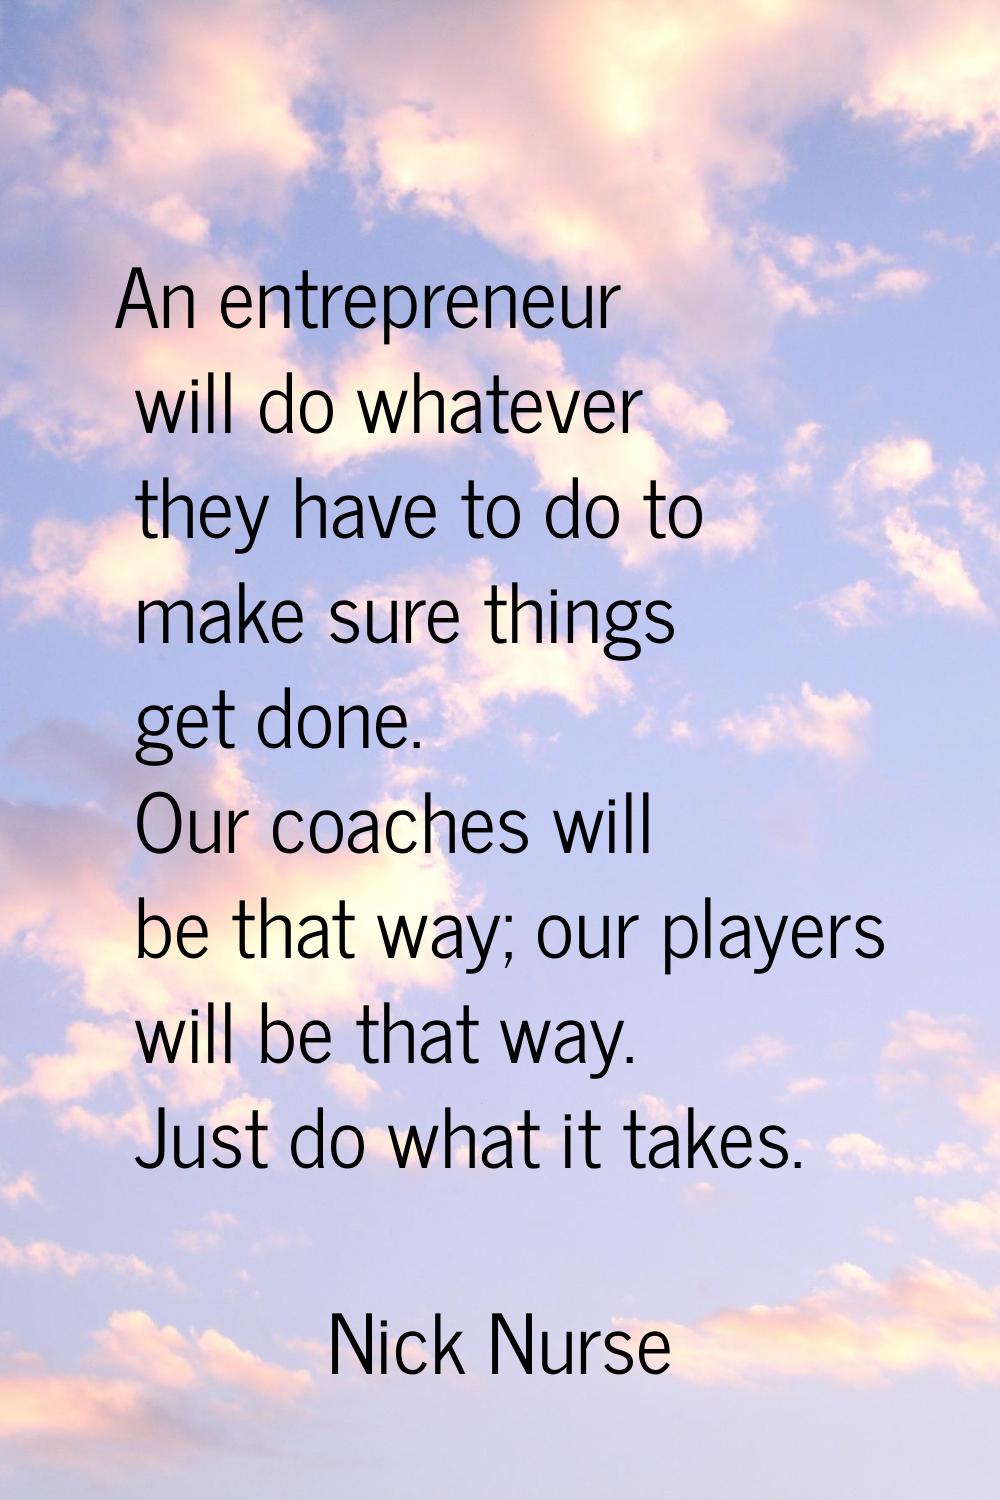 An entrepreneur will do whatever they have to do to make sure things get done. Our coaches will be 